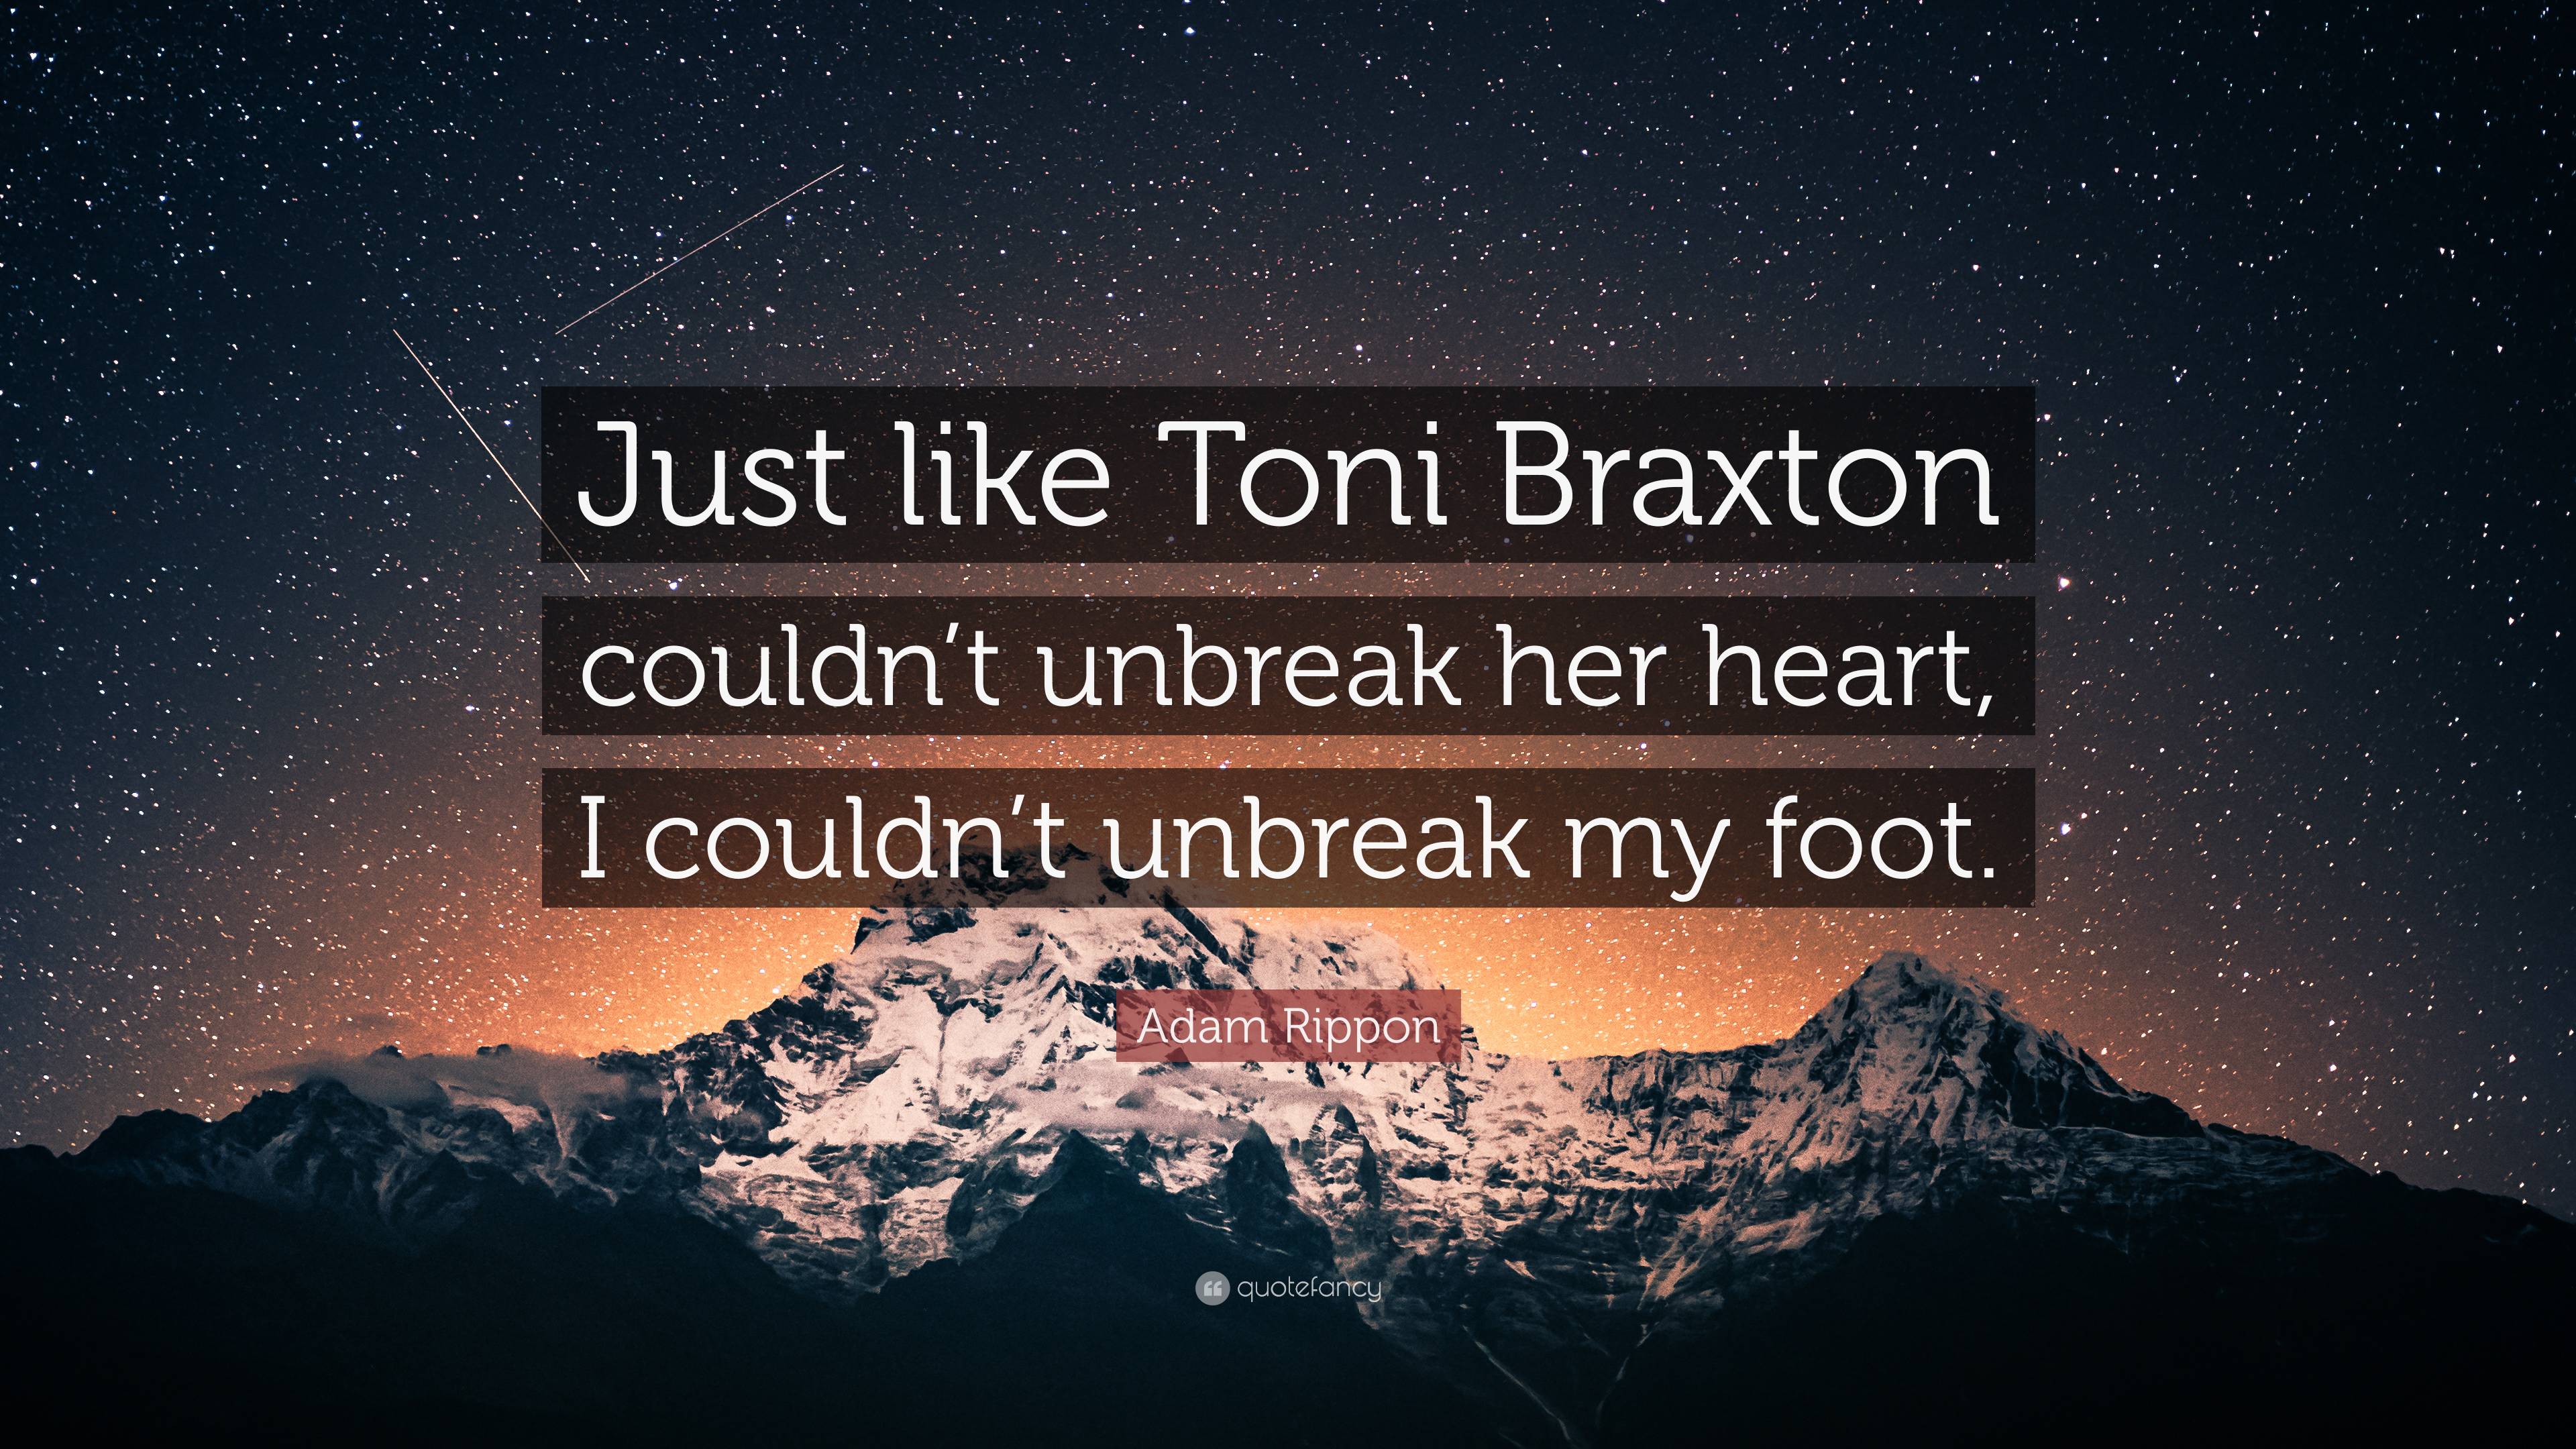 Adam Rippon Quote “just Like Toni Braxton Couldnt Unbreak Her Heart I Couldnt Unbreak My Foot” 